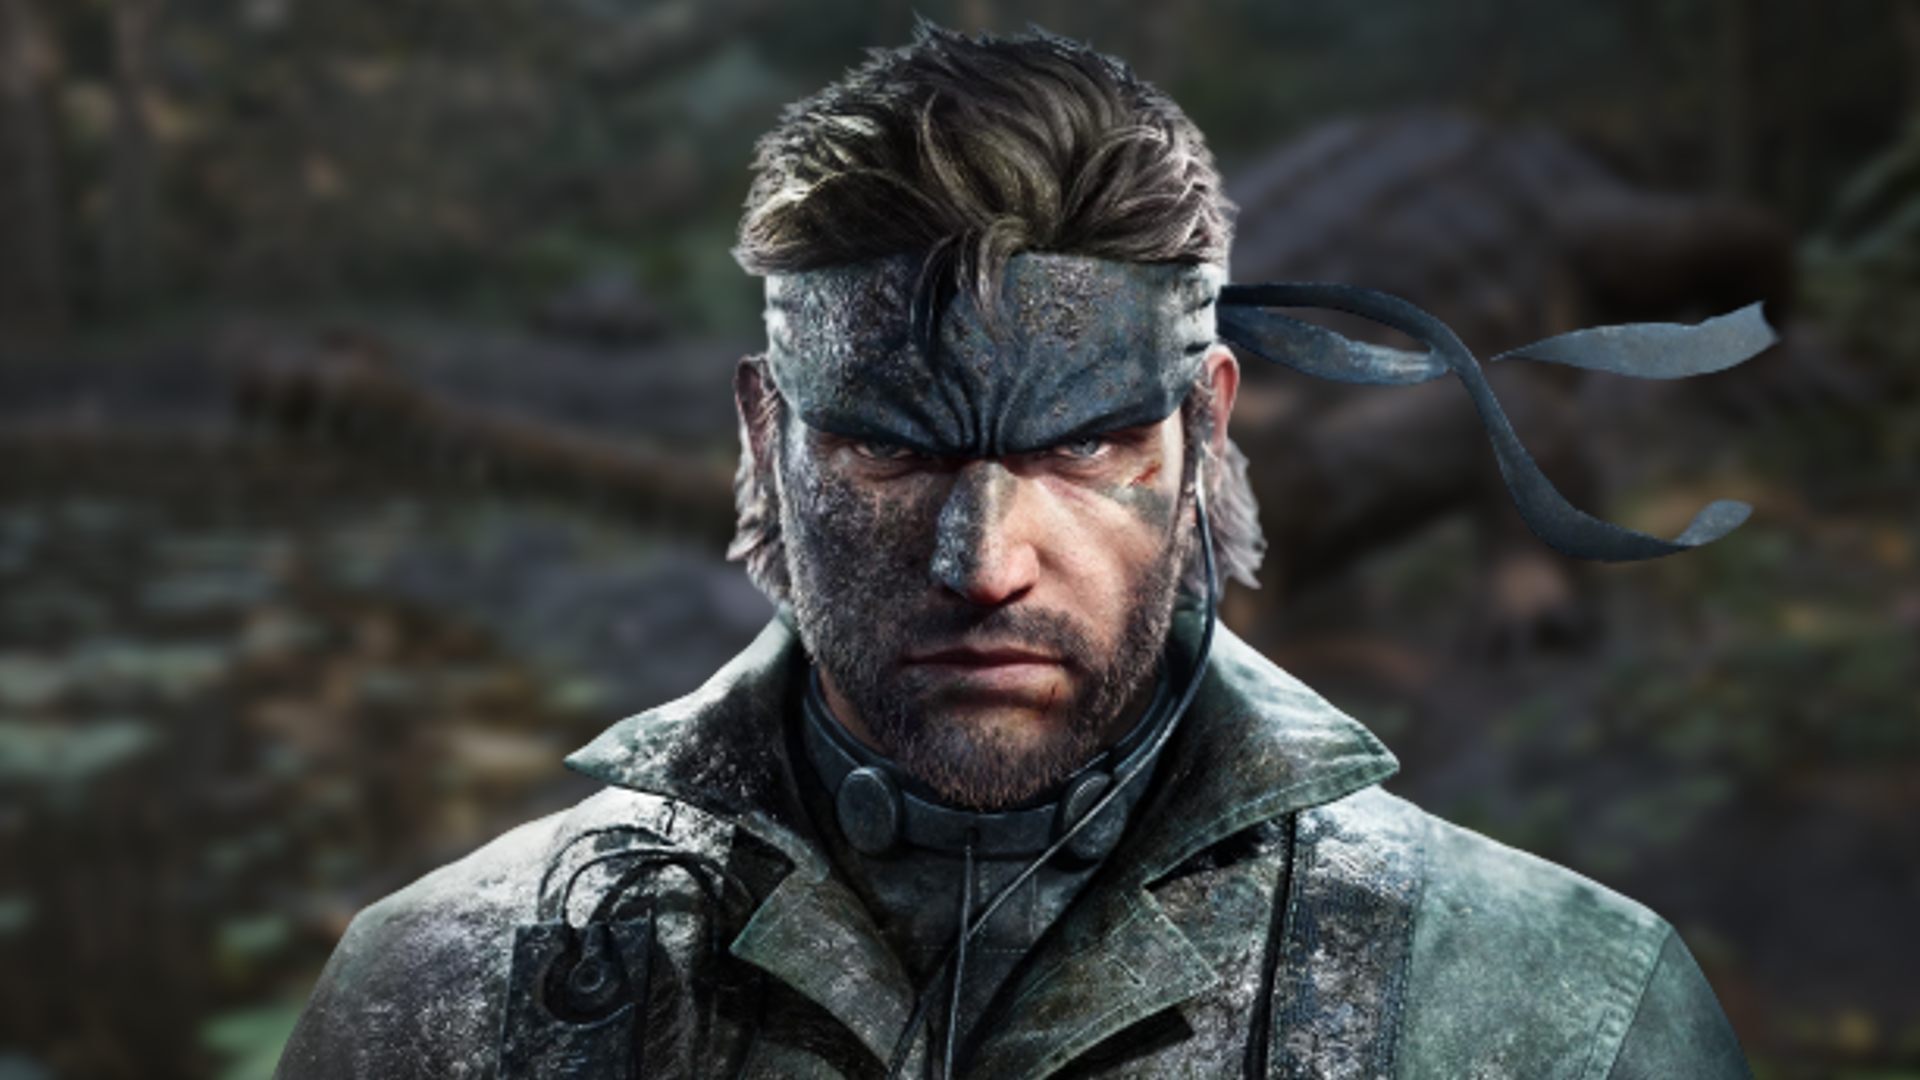 metal-gear-solid-snake-eater-release-date-delta-meaning